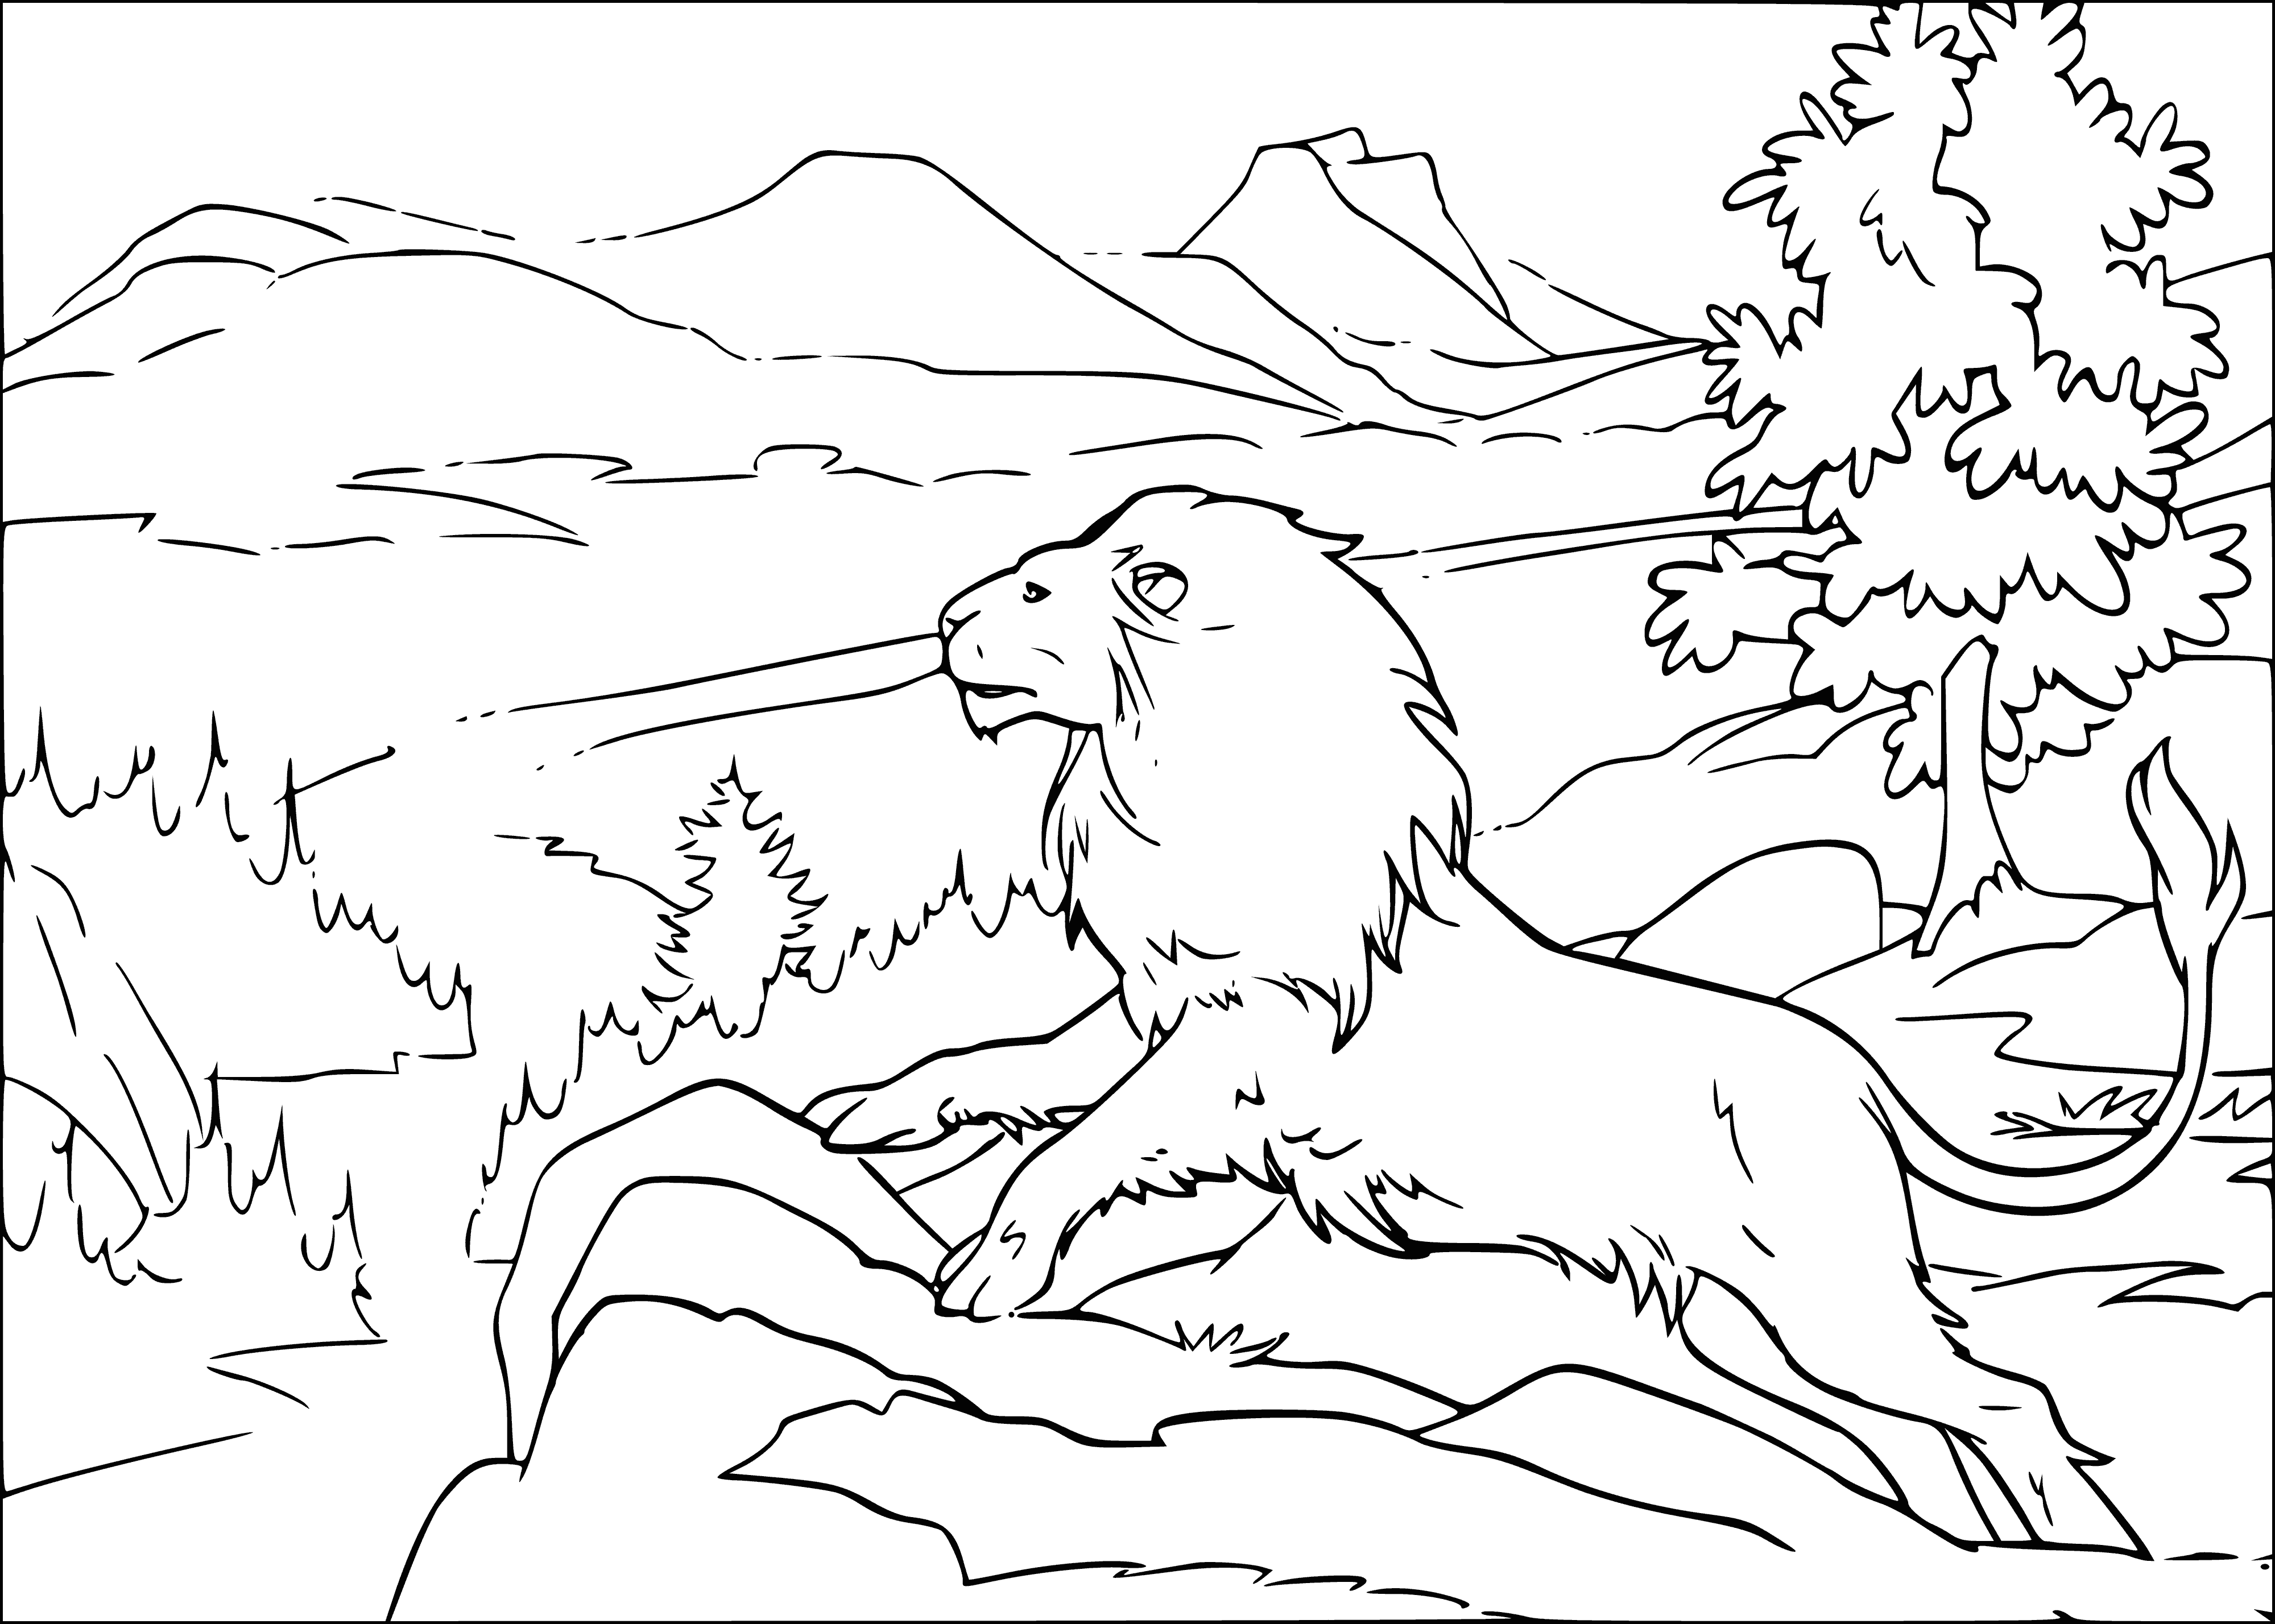 coloring page: Large lion with mane blowing in wind in front of tall trees and distant castle with flags flying. A tranquil and majestic scene.